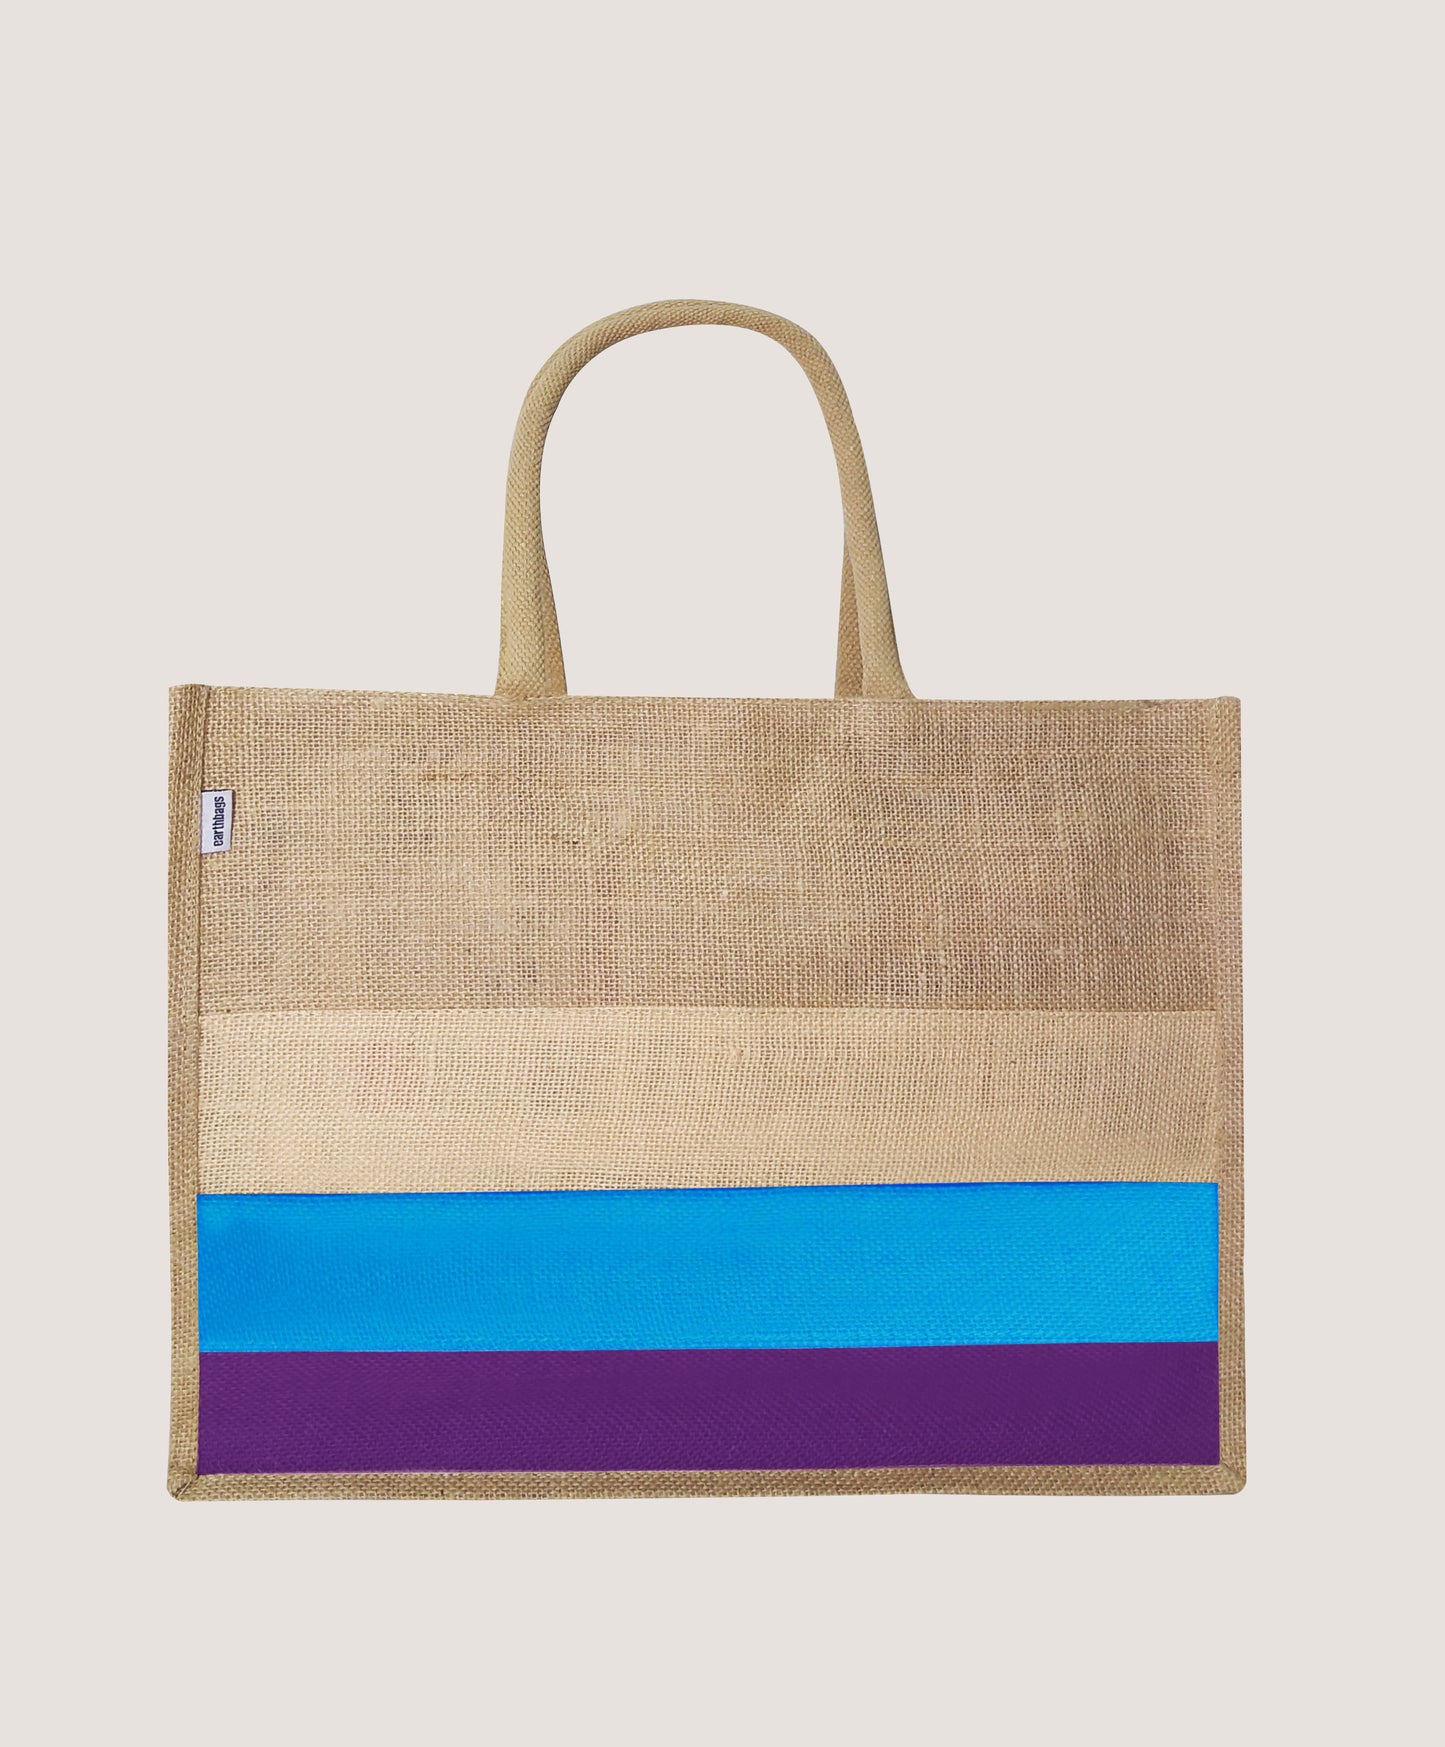 EARTHBAGS LINER SHOPPER IN MULTICOLOR WITH ZIPPER